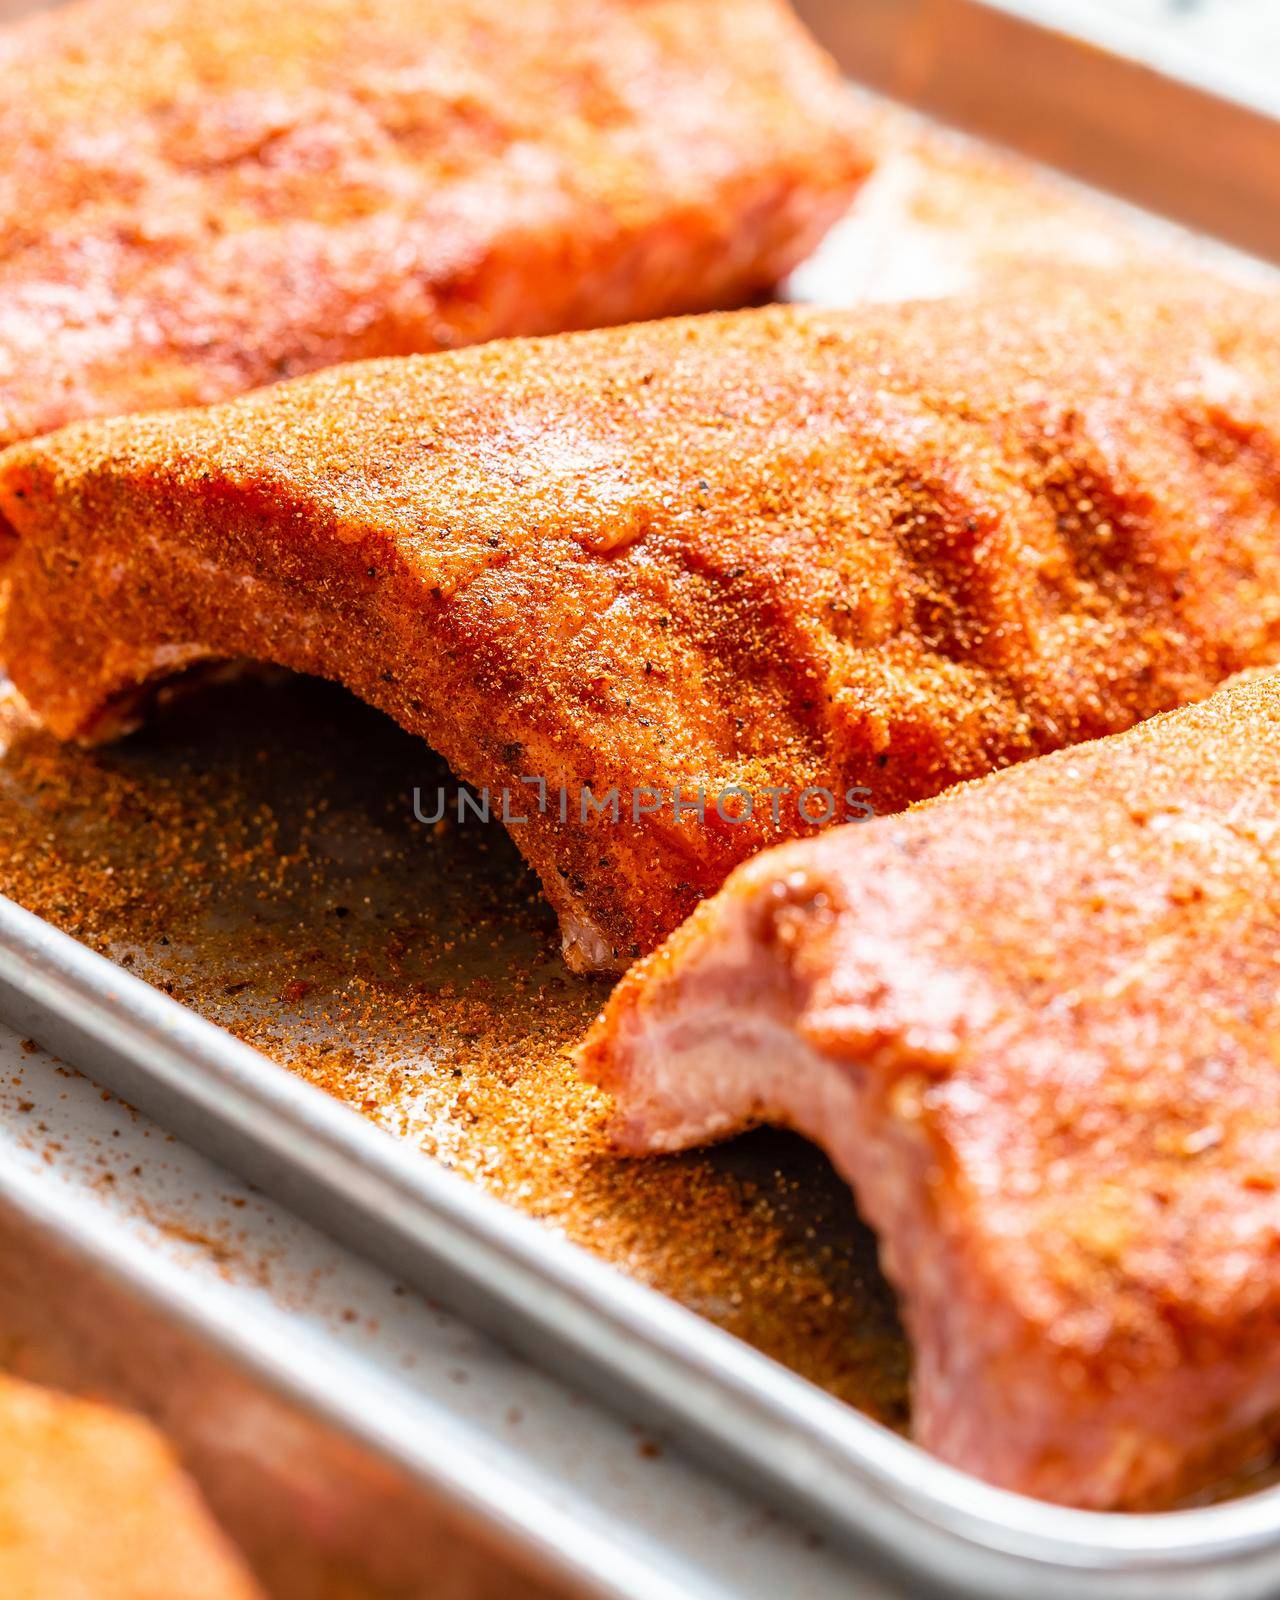 Raw St Louis Style BBQ Ribs with Rub Ready to Cook